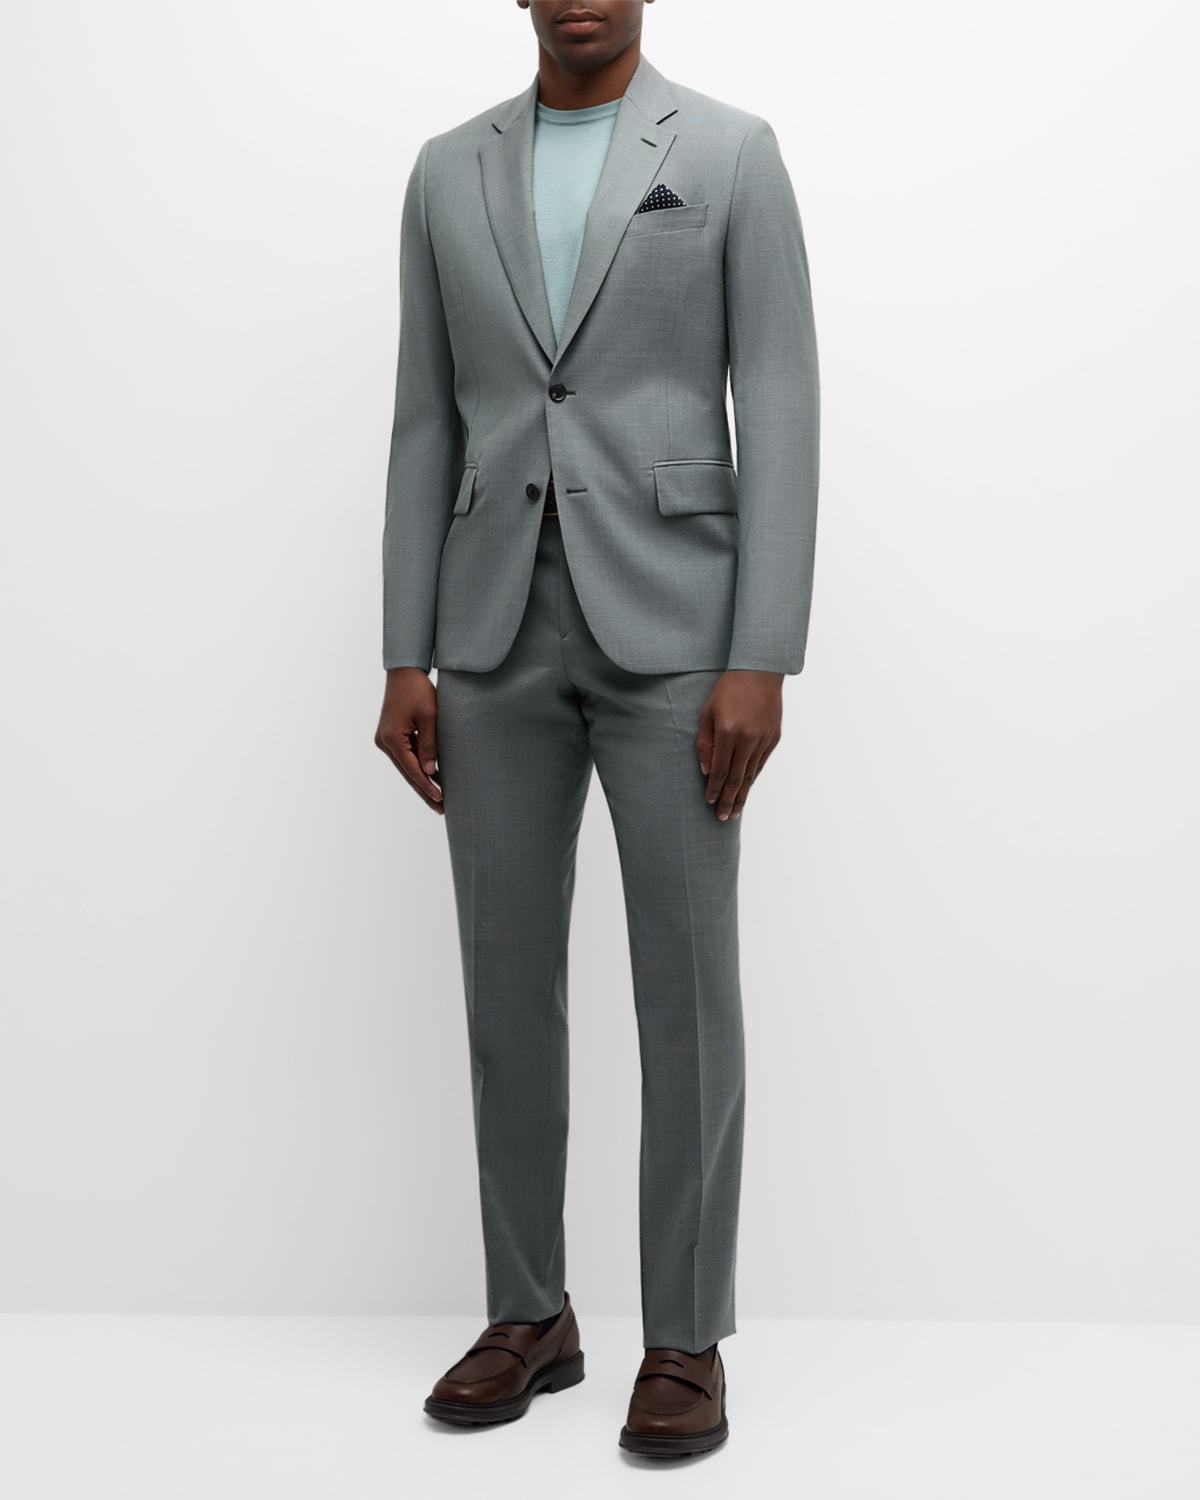 Paul Smith Men's Textured Stretch Cotton Suit In Green